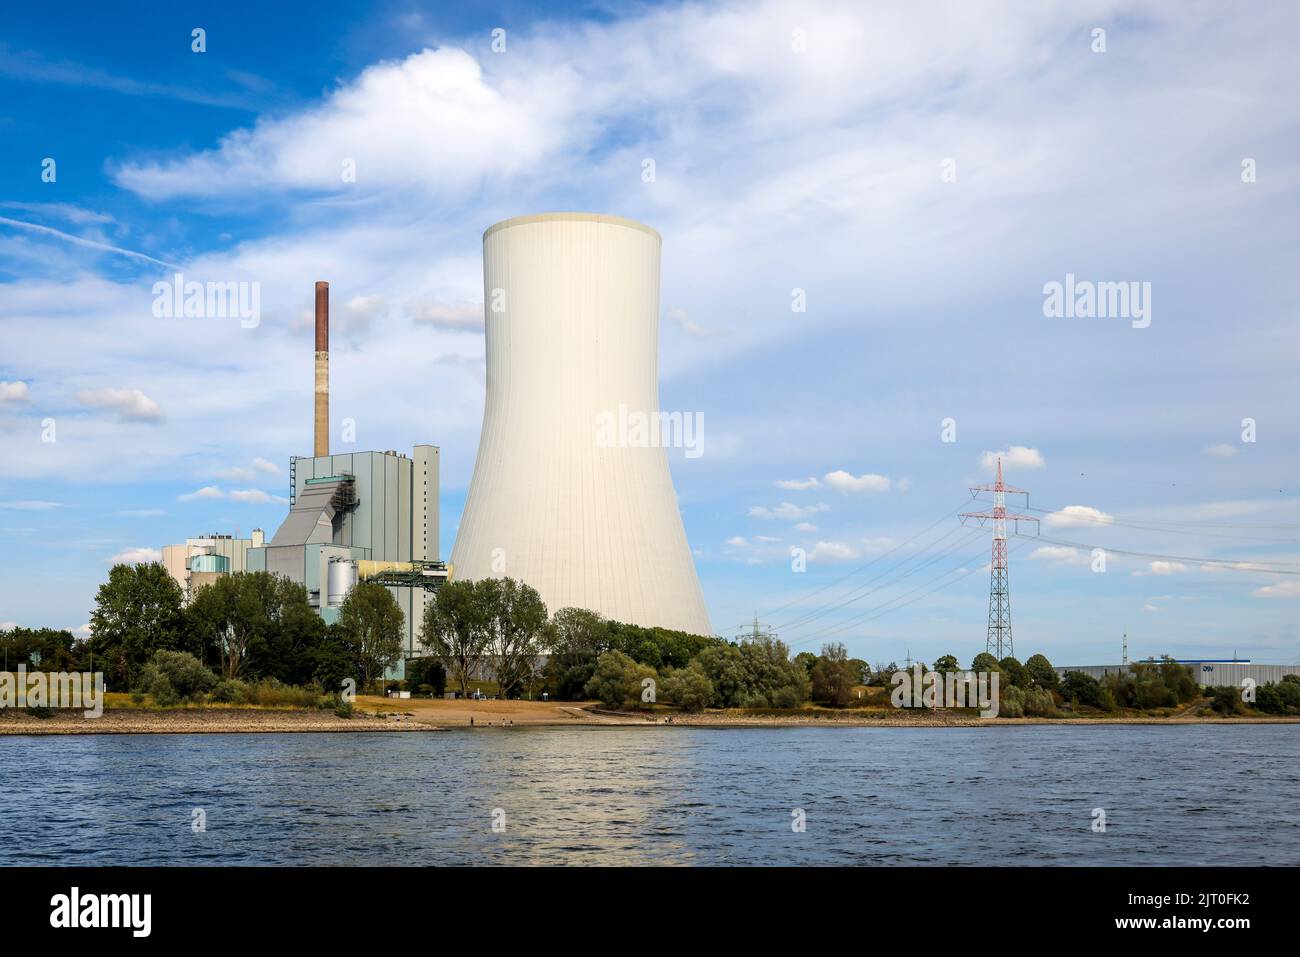 Duisburg, North Rhine-Westphalia, Germany - STEAG hard coal-fired power plant Walsum on the Rhine with low water. Stock Photo